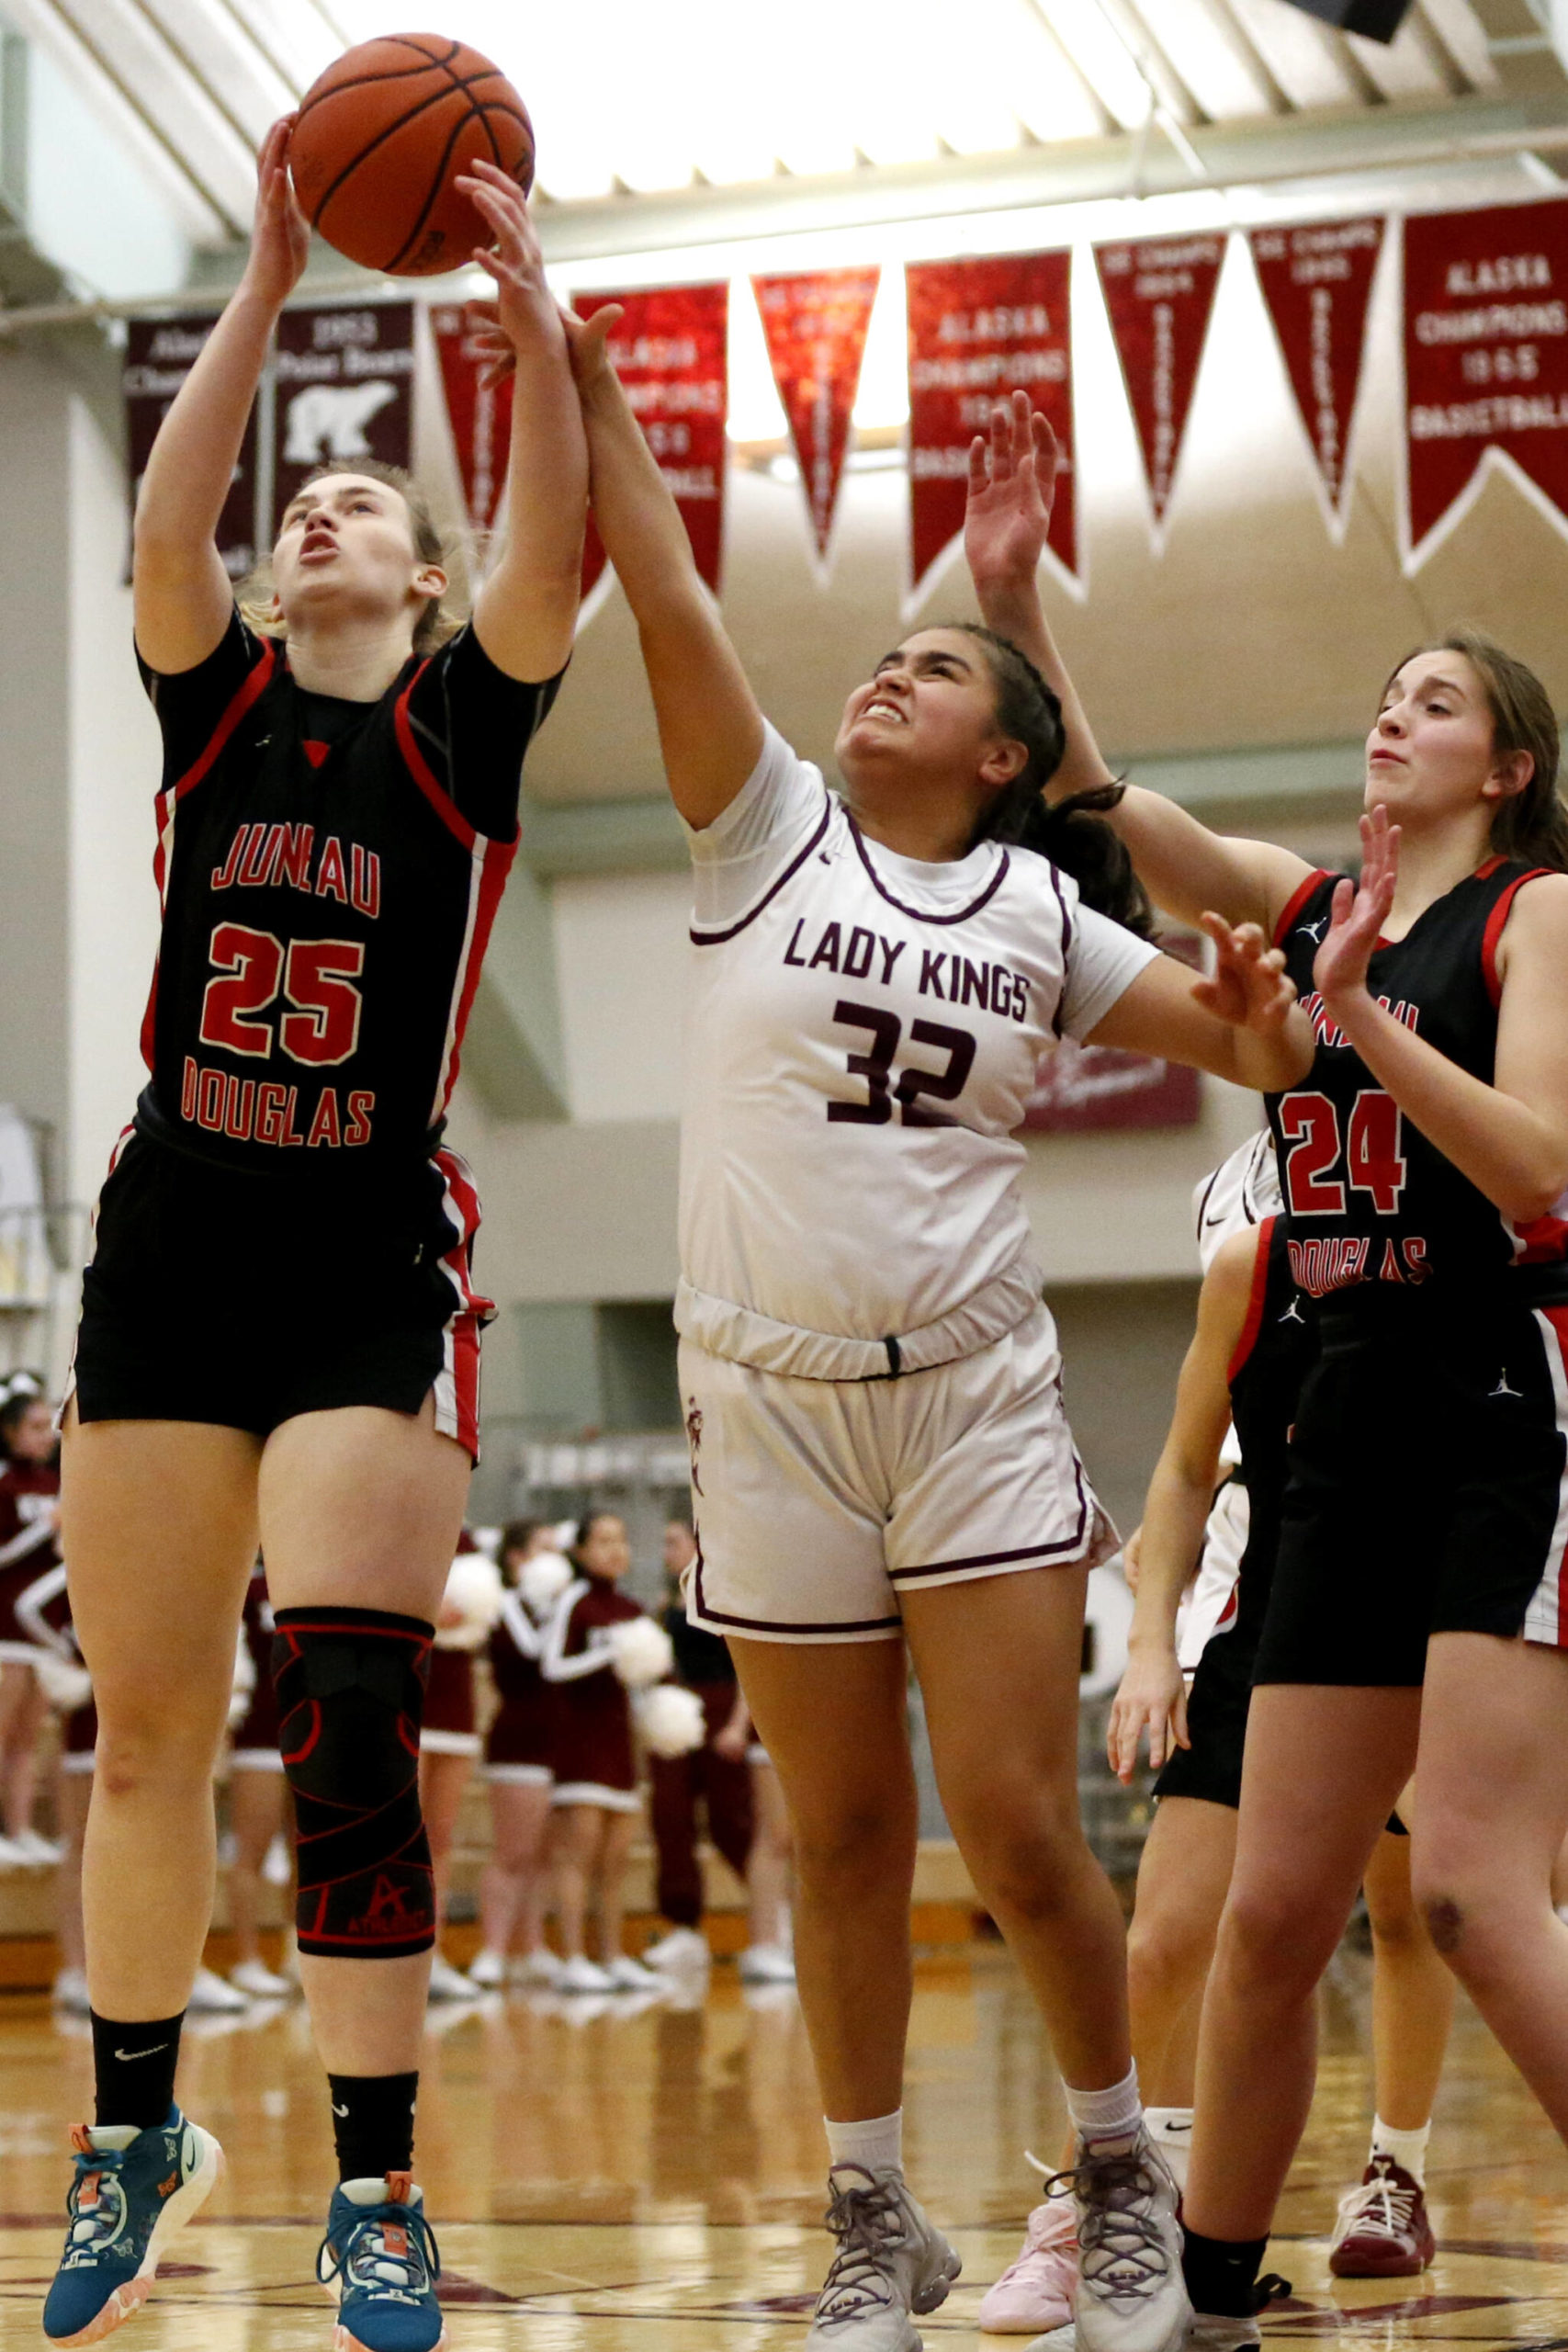 Juneau’s Ashley Laudert (25), Kayhi’s Kylie Brendible (32), and Juneau’s Mila Hargrave (24) go up for a rebound on Friday at Ketchikan High School. Juneau won 40-33. (Christopher Mullen / Ketchikan Daily News)